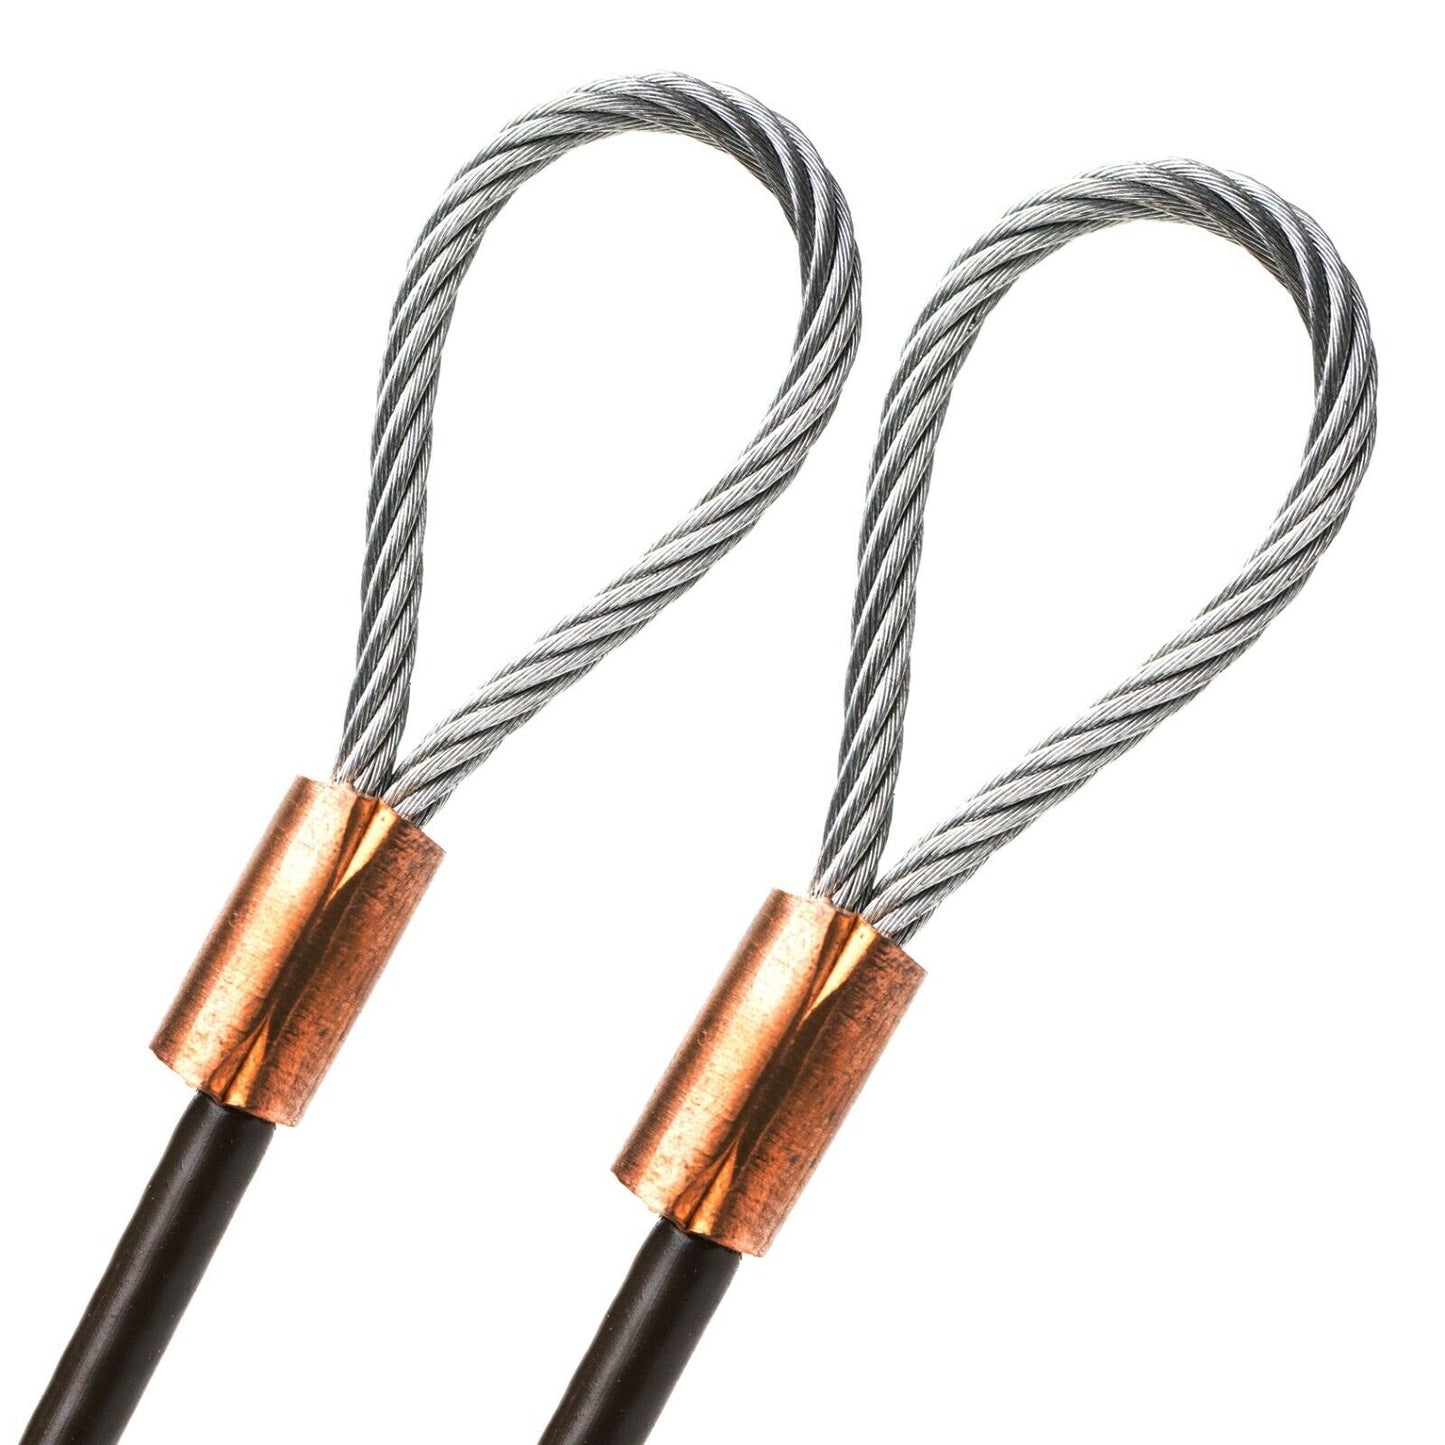 1-100ft Cut To Size 1/4 Galvanized Steel Cable BROWN Vinyl Coated To 3/16 With Copper Sleeves MADE IN USA